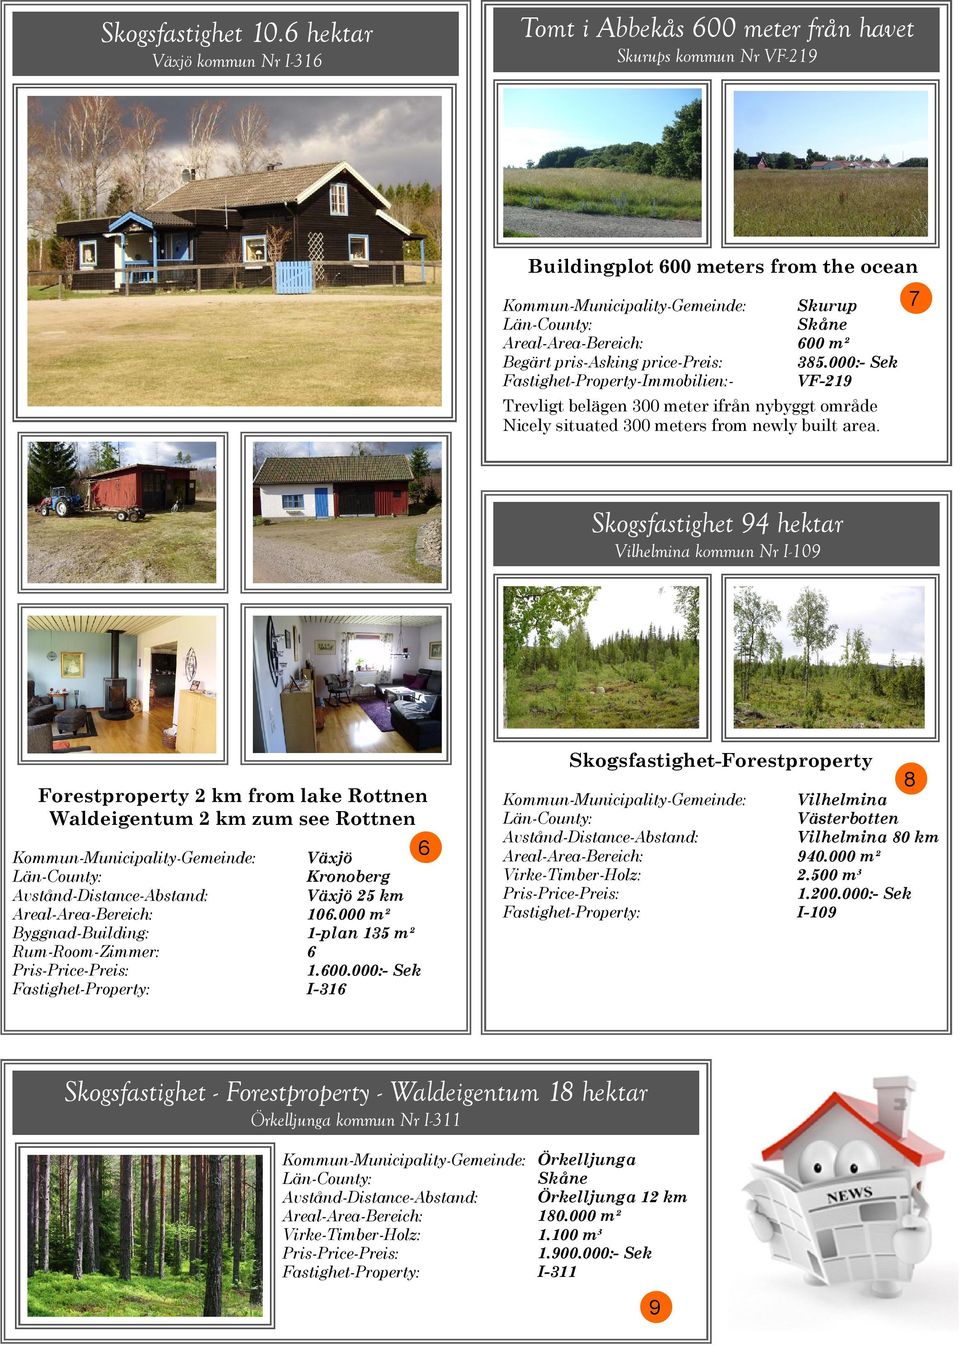 000:- Sek Fastighet-Property-Immobilien:- VF-219 Trevligt belägen 300 meter ifrån nybyggt område Nicely situated 300 meters from newly built area.